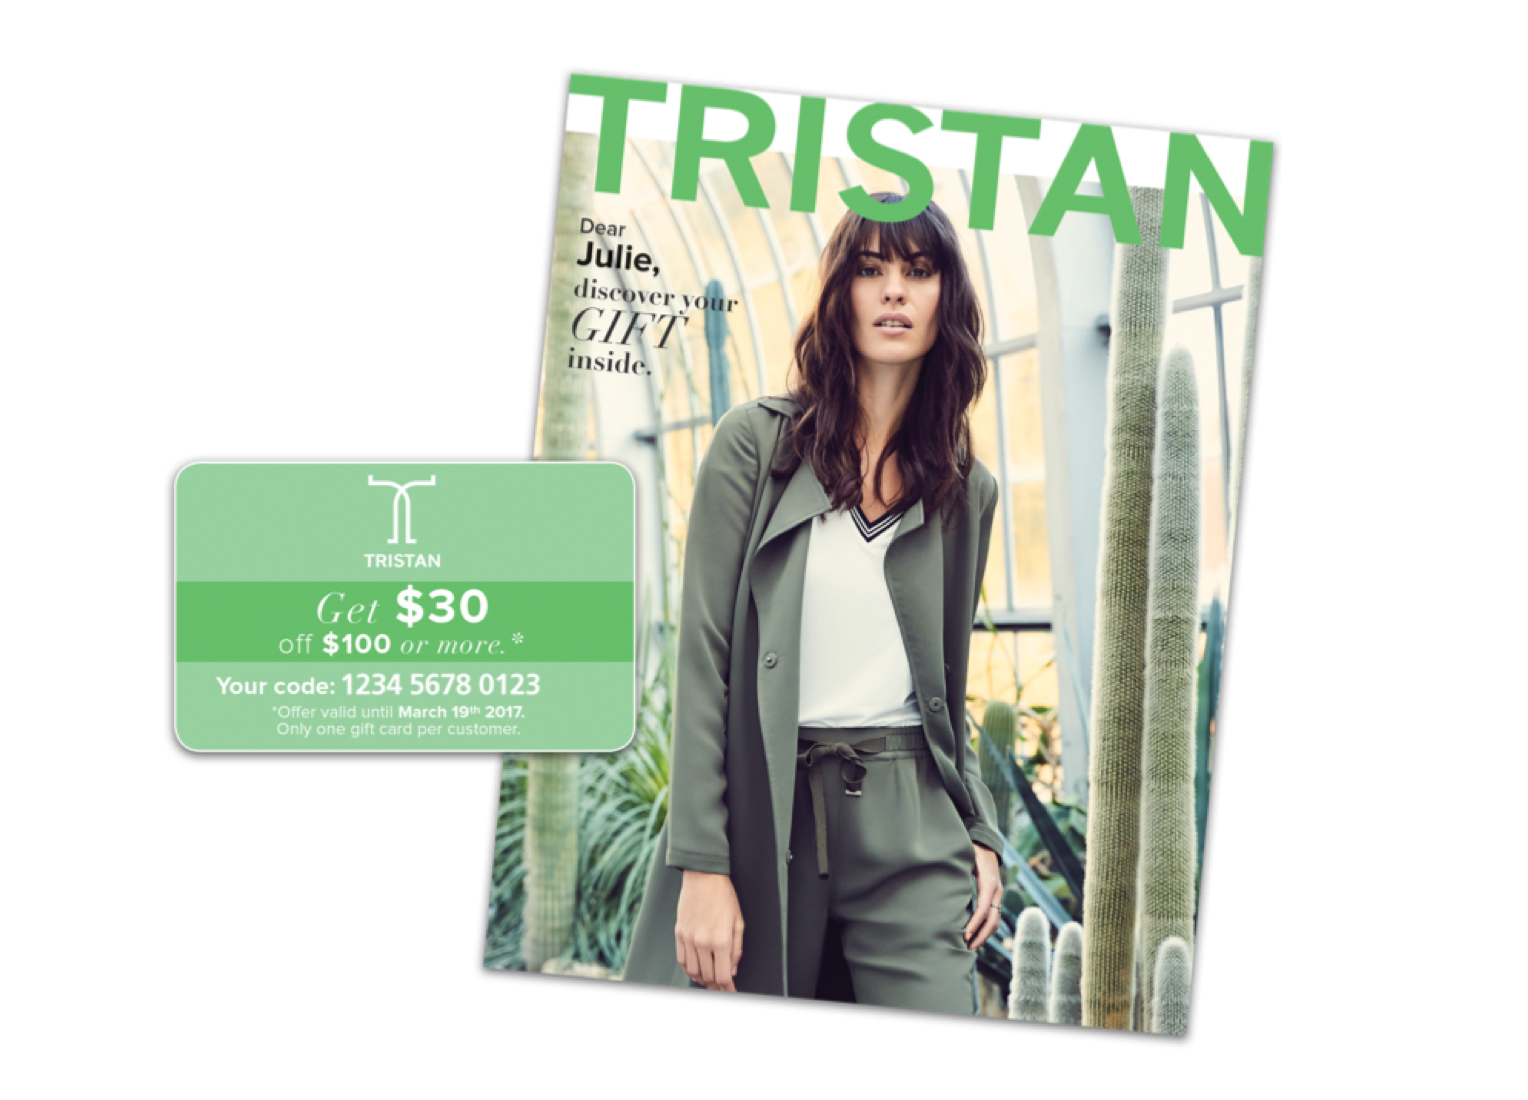 A catalogue design example from clothing brand, Tristan.